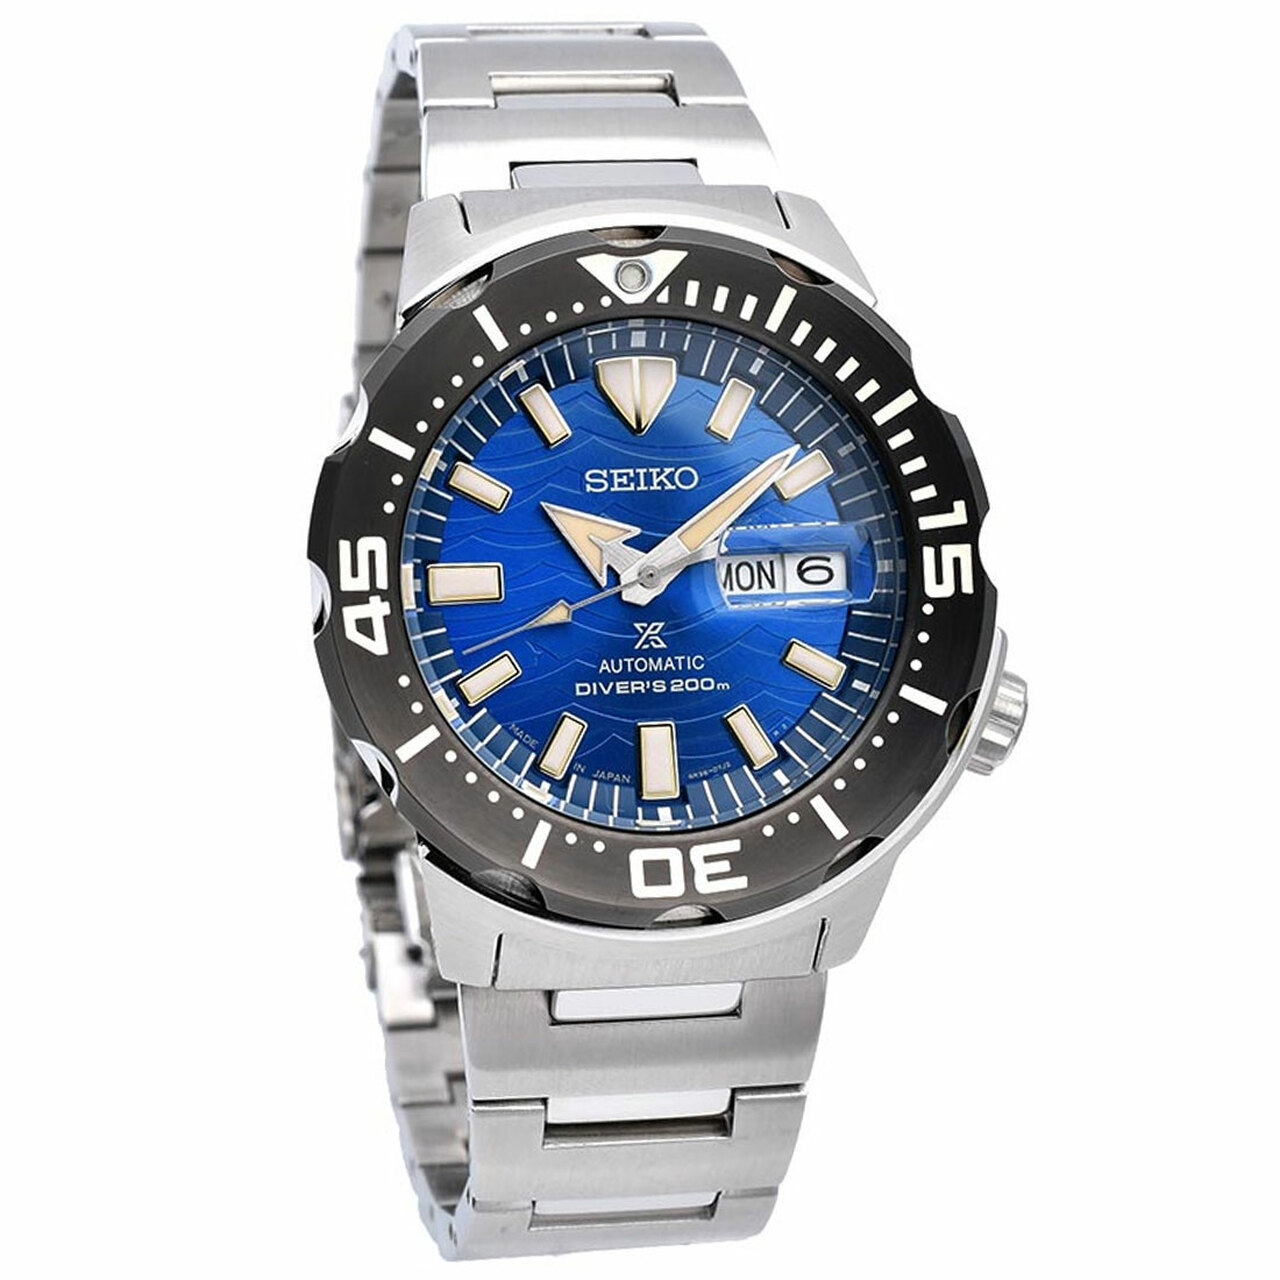 SEIKO PROSPEX AUTOMATIC DIVER’S MONSTER SAVE THE OCEAN  MEN’S WATCH SRPE09J1